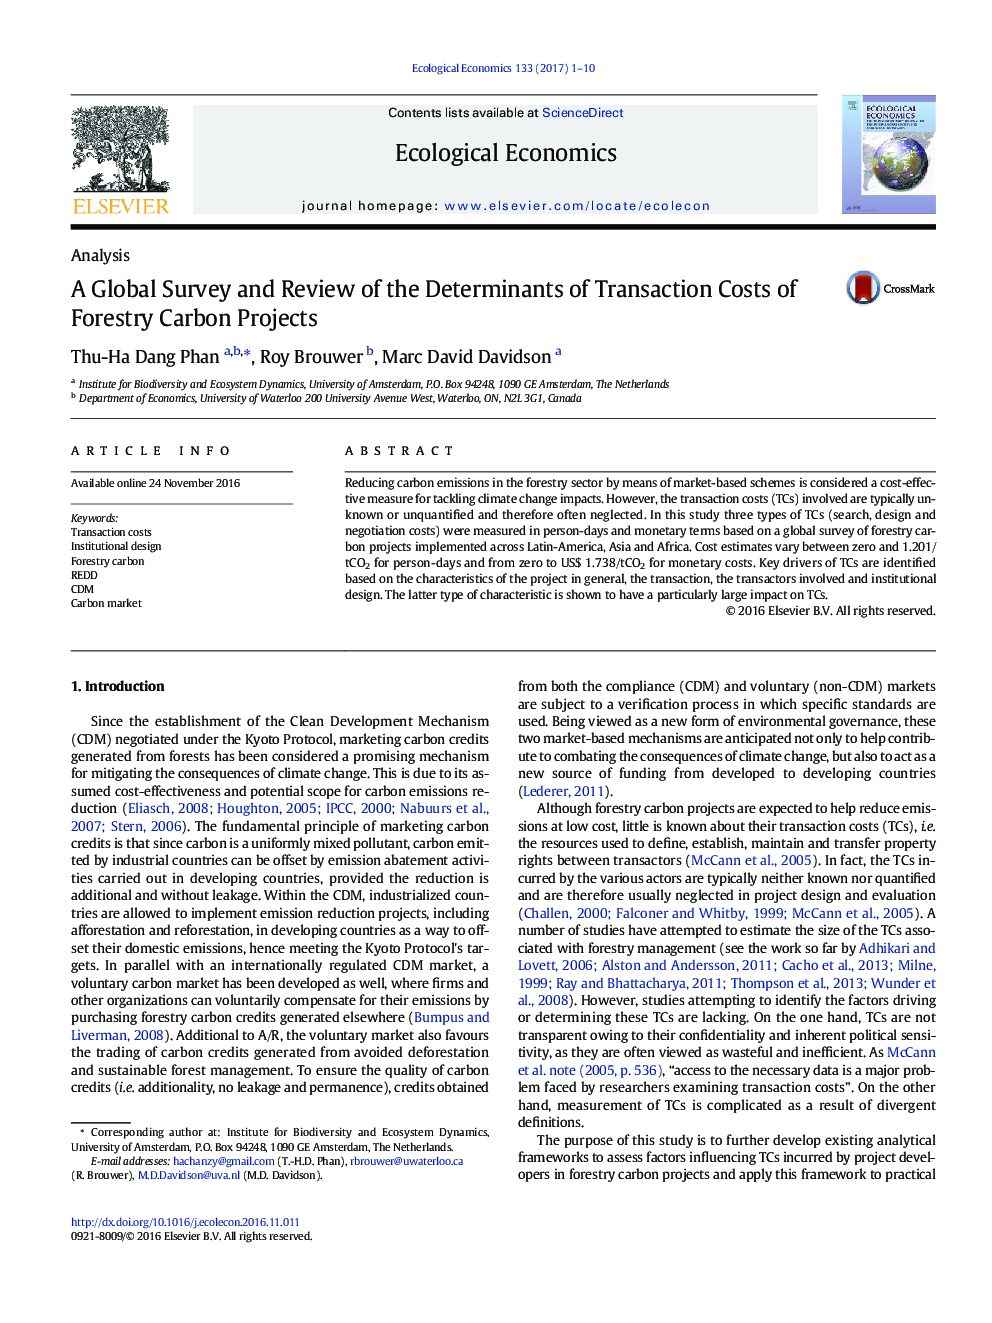 A Global Survey and Review of the Determinants of Transaction Costs of Forestry Carbon Projects